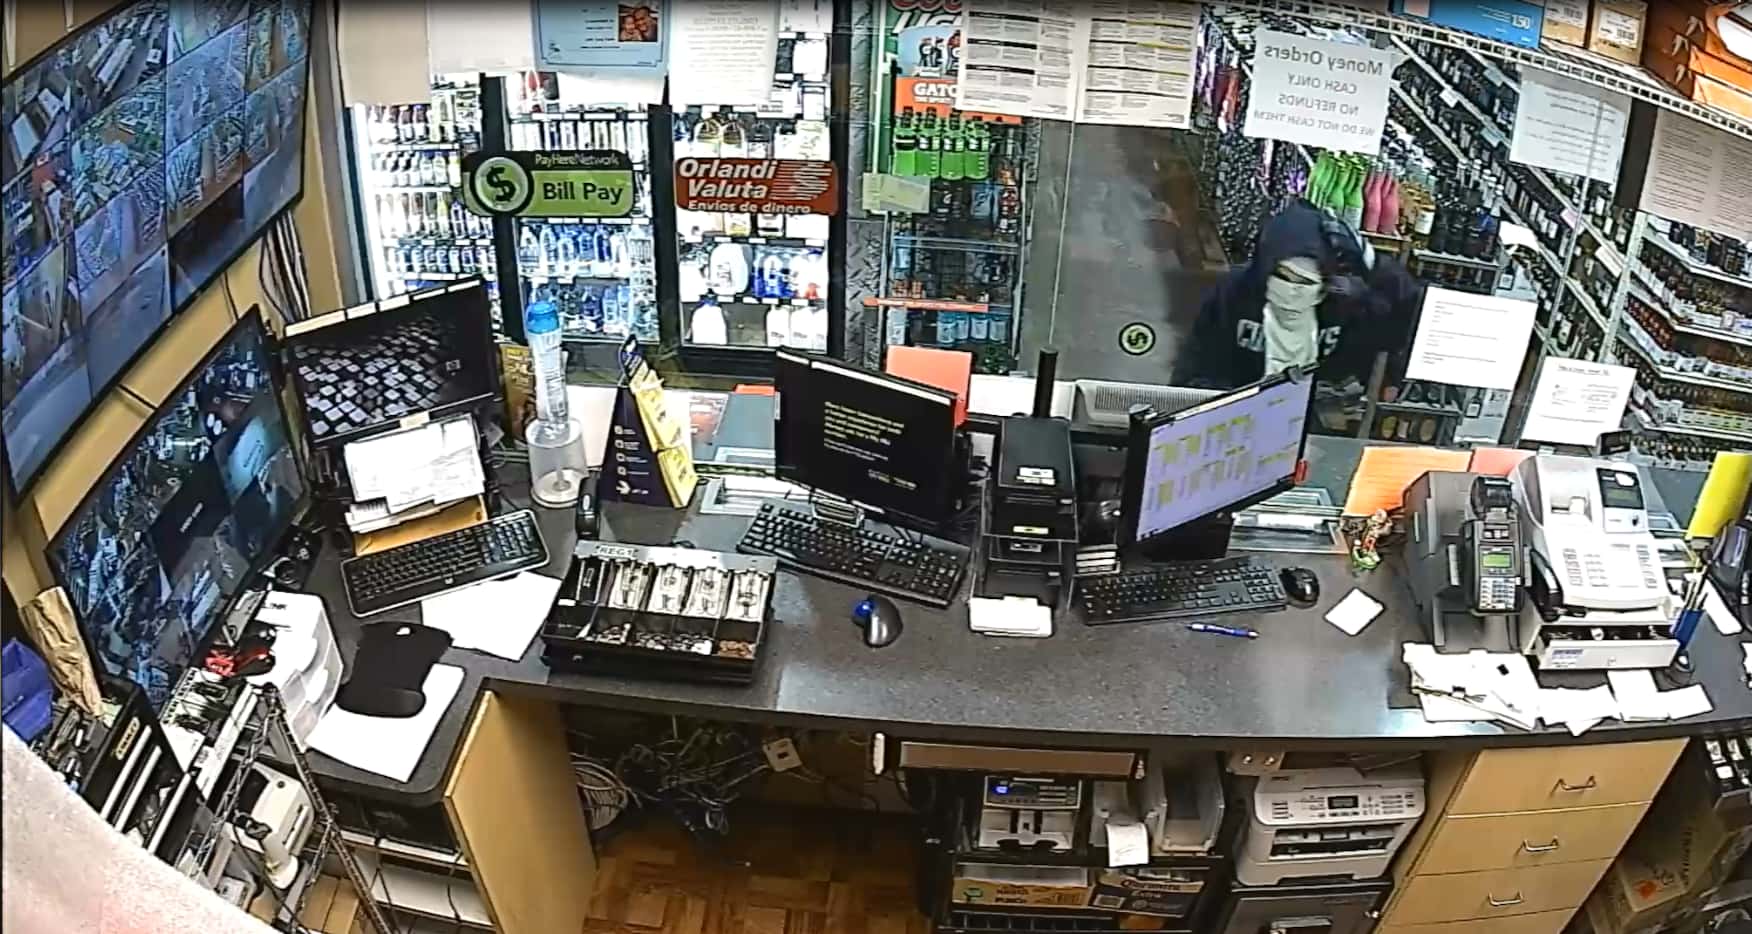 Police released surveillance footage Thursday of the two males they said went into the store...